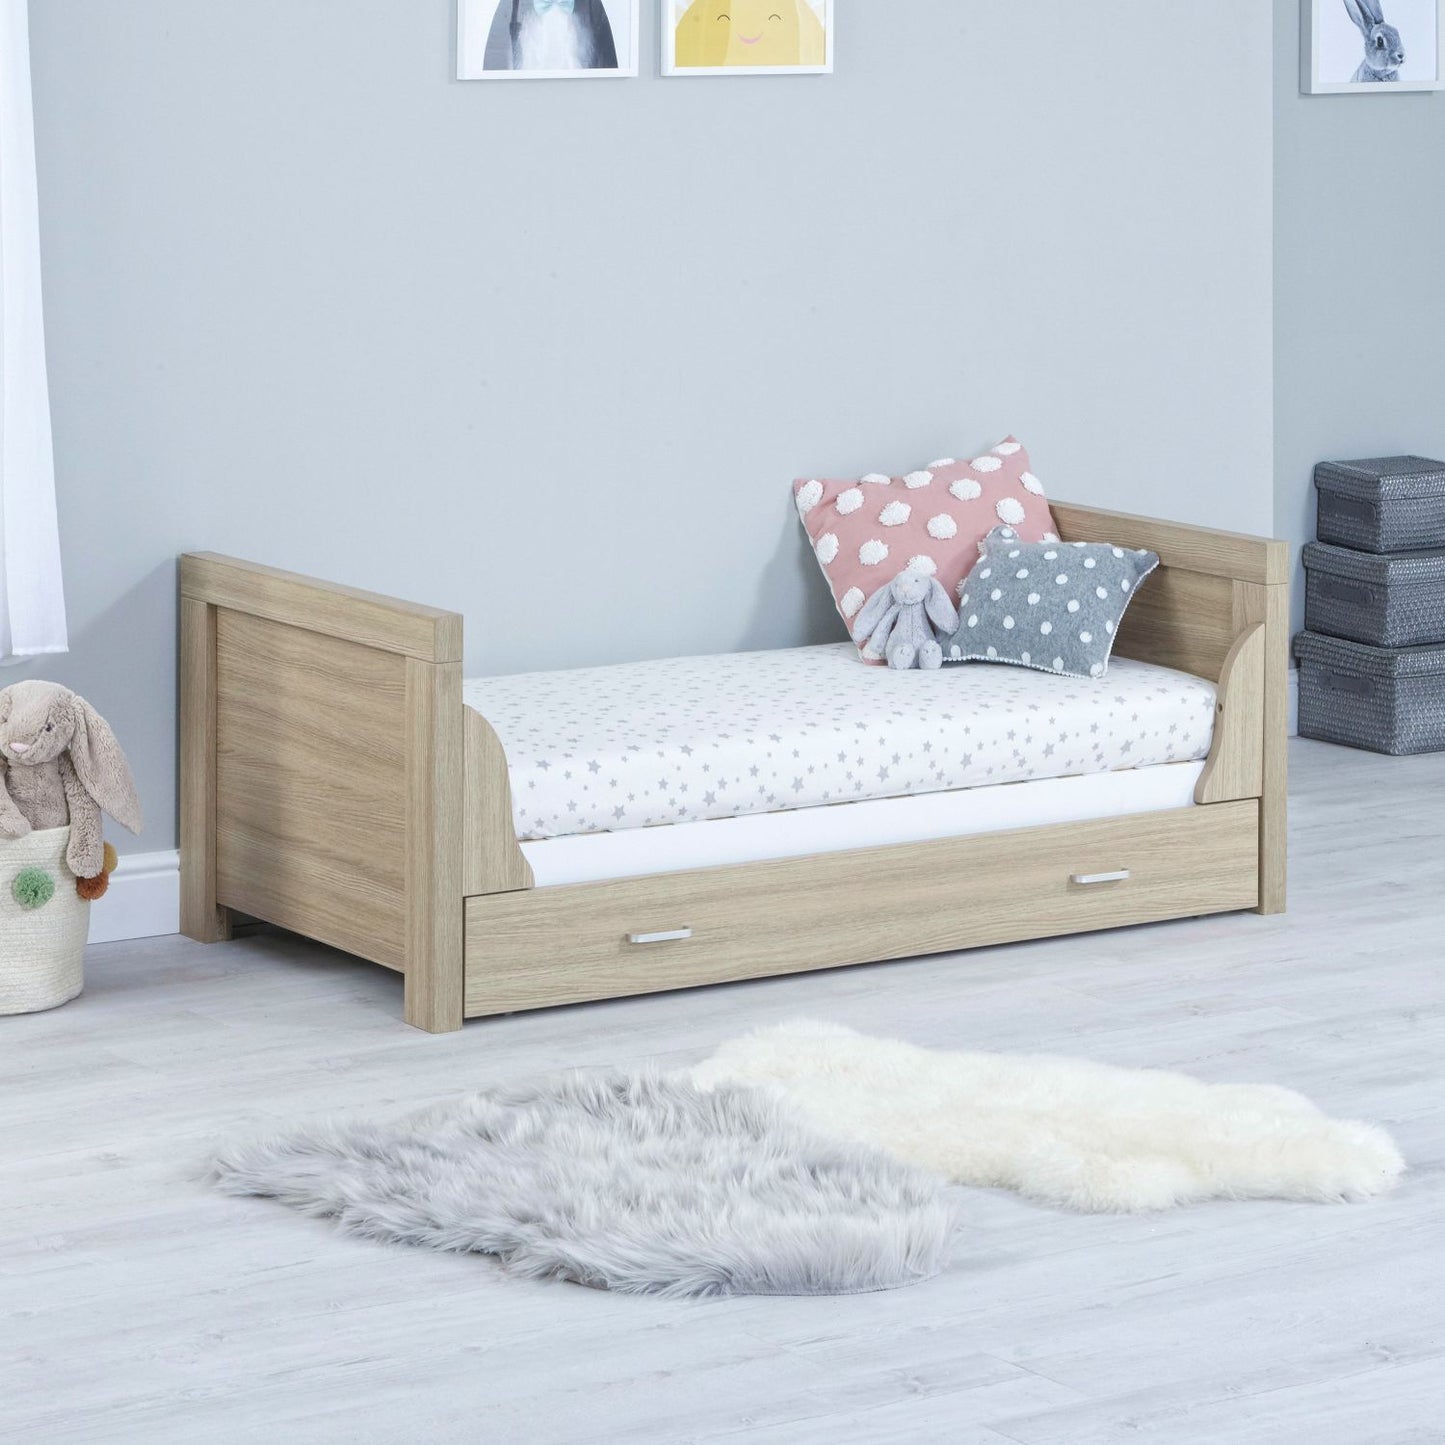 Babymore Luno Modern 2-in-1 Cot Bed (0-5yrs)